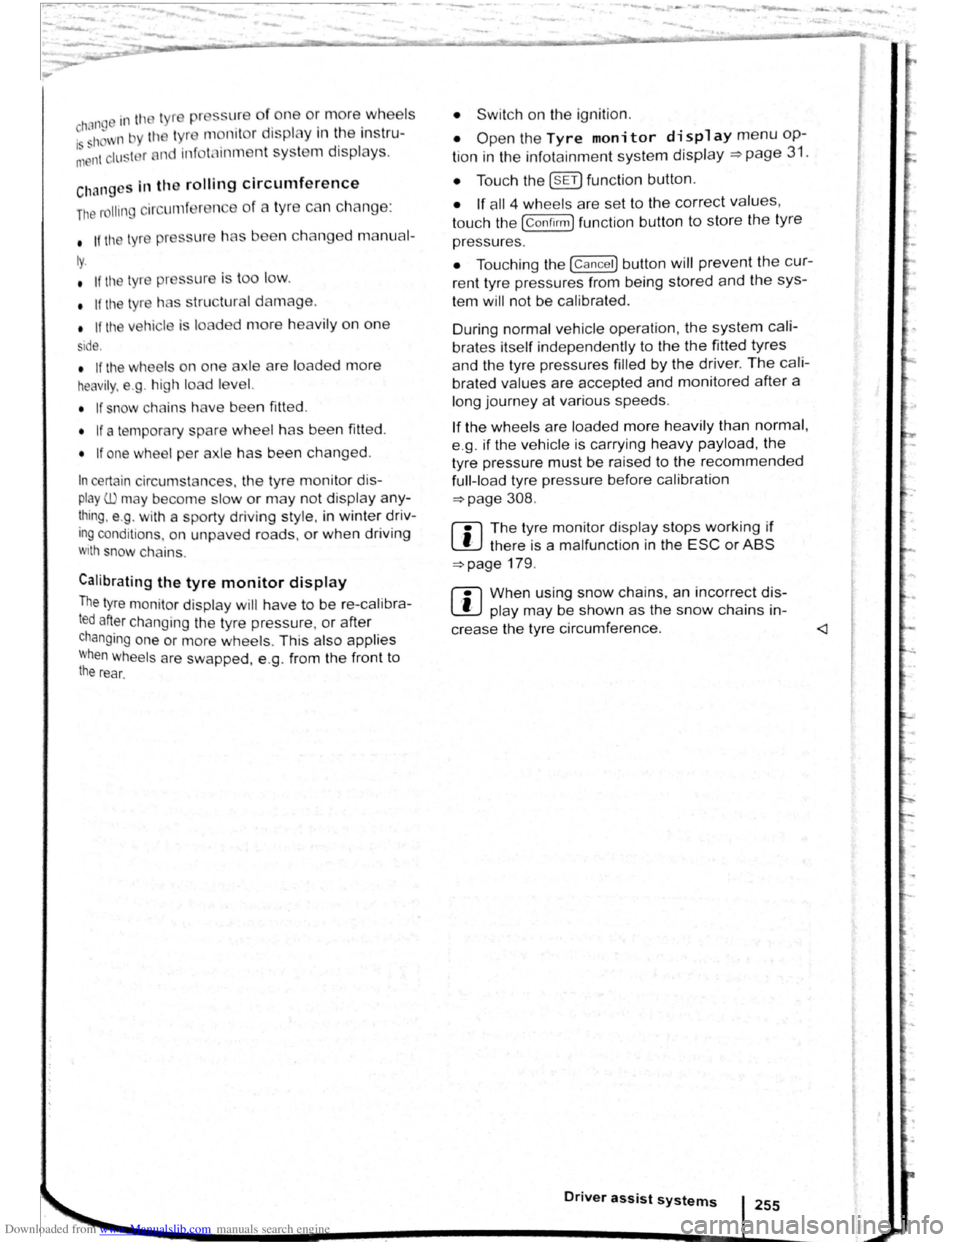 VOLKSWAGEN GOLF 2011  Owner´s Manual Downloaded from www.Manualslib.com manuals search engine • If tll ly . 
s i
de.  n 
ch a ng ed  manu al-
is  t
oo low. 
I lo  ded more heavily  on one 
• If tile wh el  on  one axle  are  loaded  